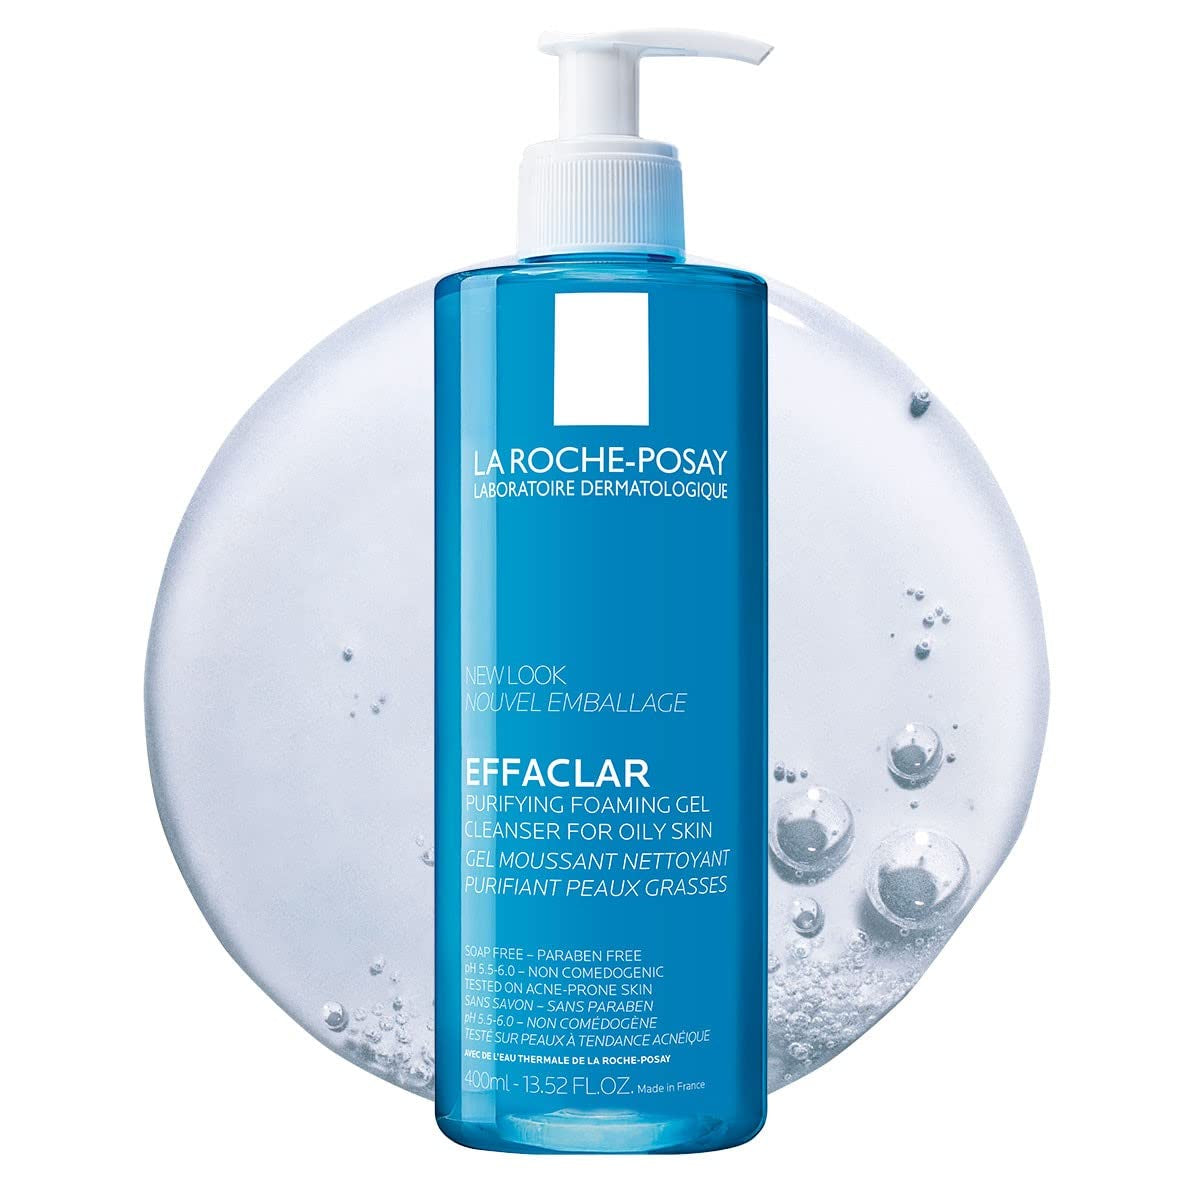 La Roche-Posay Effaclar Purifying Foaming Gel Cleanser for Oily Skin, Alcohol Free Acne Face Wash, Oil Absorbing Deep Pore Cleanser, Oil Free, Light Scent and Safe for Sensitive Skin - Free & Fast Delivery